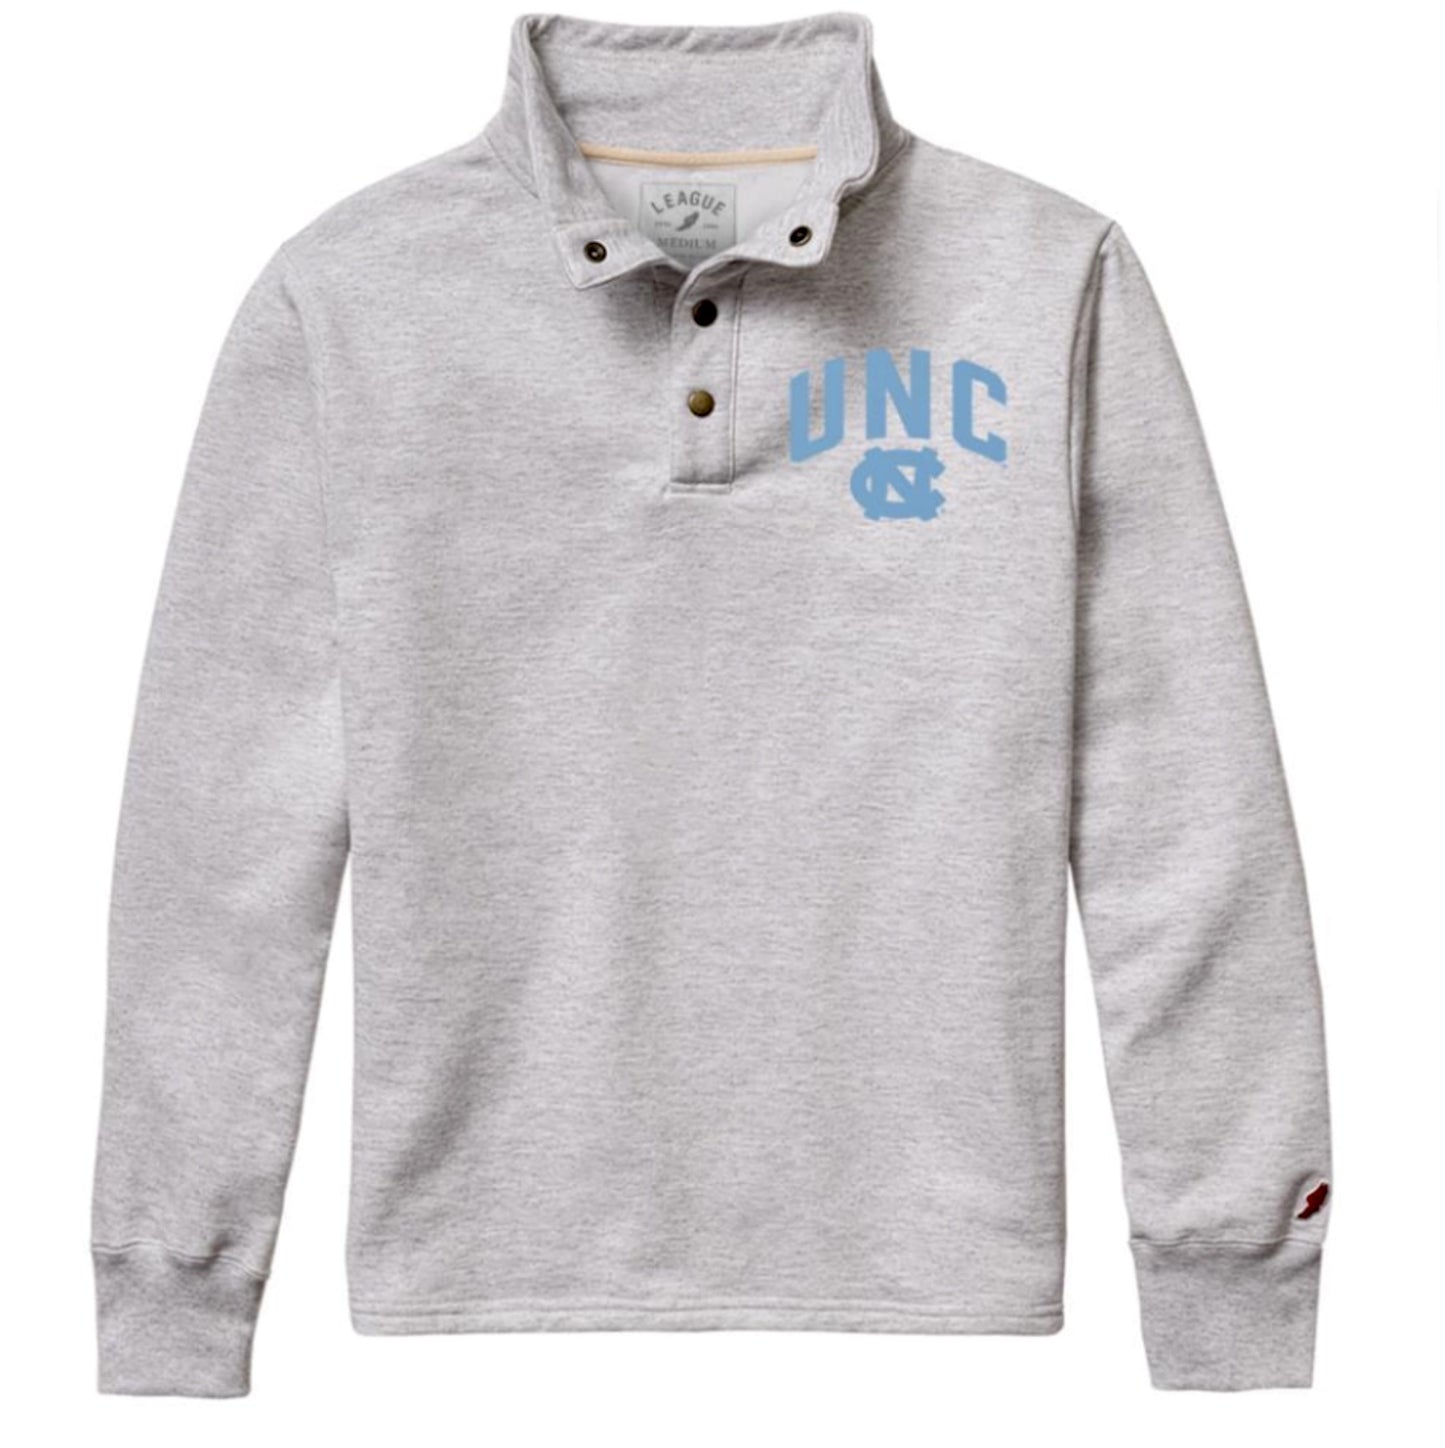 Ash Grey Snap Up Pullover Jacket with UNC Tar Heels Logo in Carolina Blue on the Left Chest